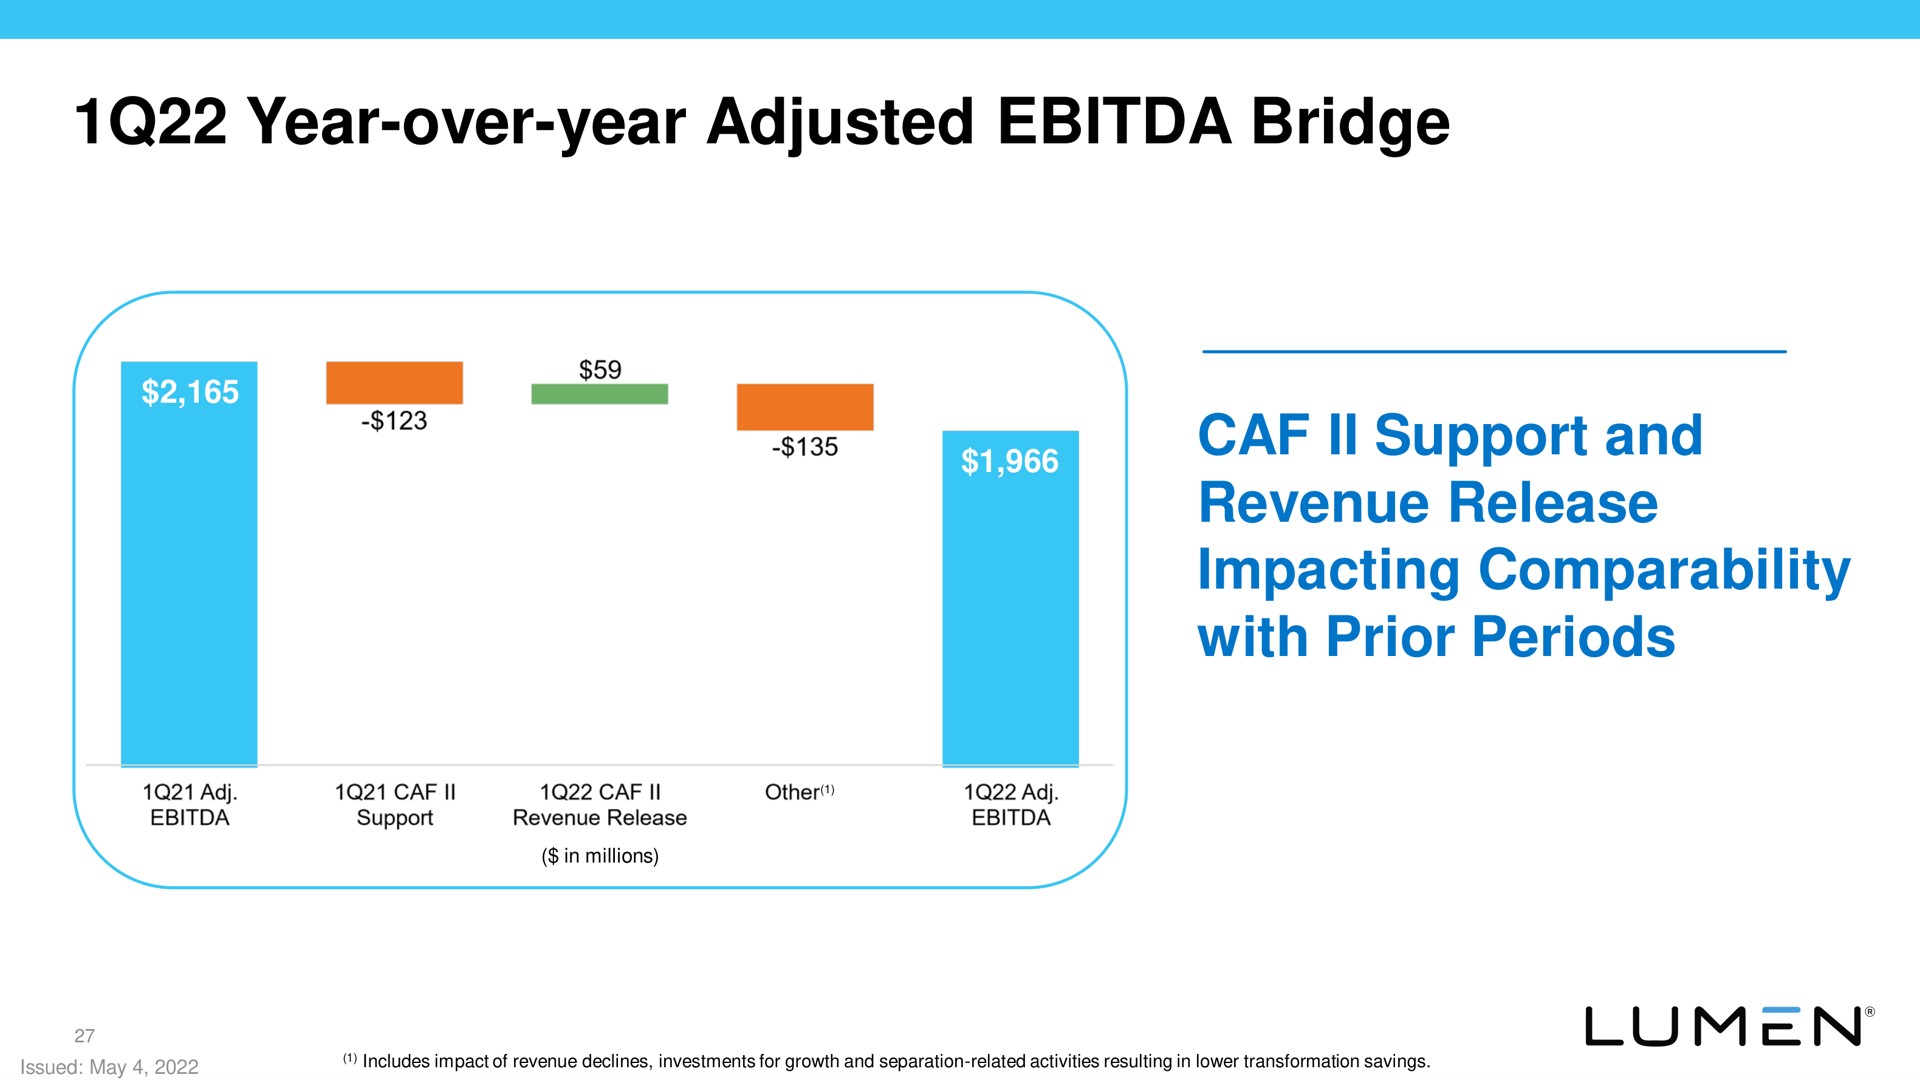 year over year adjusted bridge support and revenue release impacting comparability with prior periods | Lumen